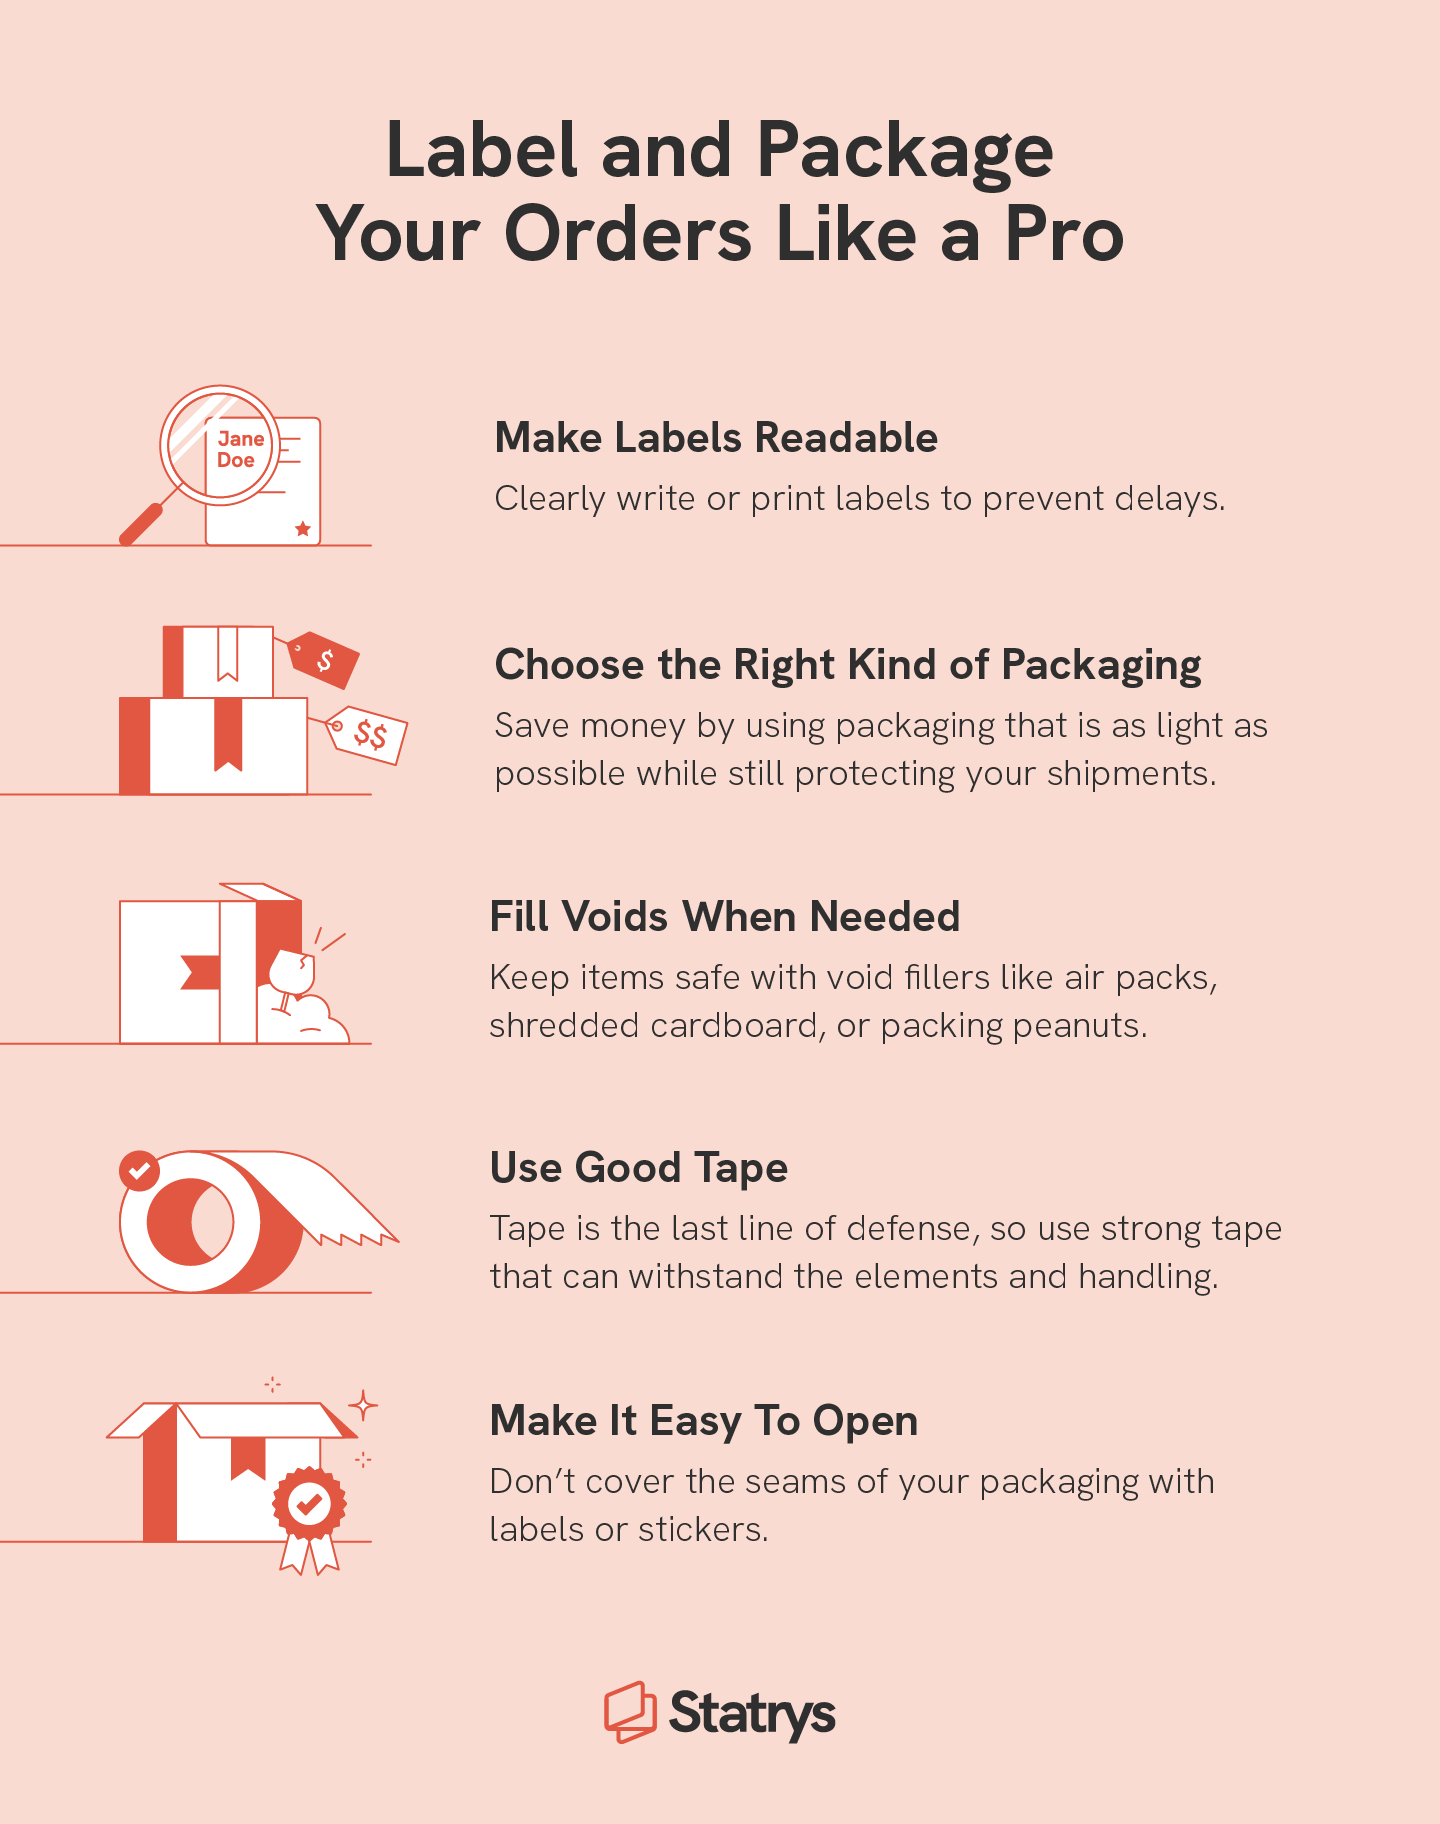 Illustration discussing ways to professionally label and package your orders during the ecommerce shipping process with a readable label, multiple boxes, using void fillers, tape, and easy-to-open box images.